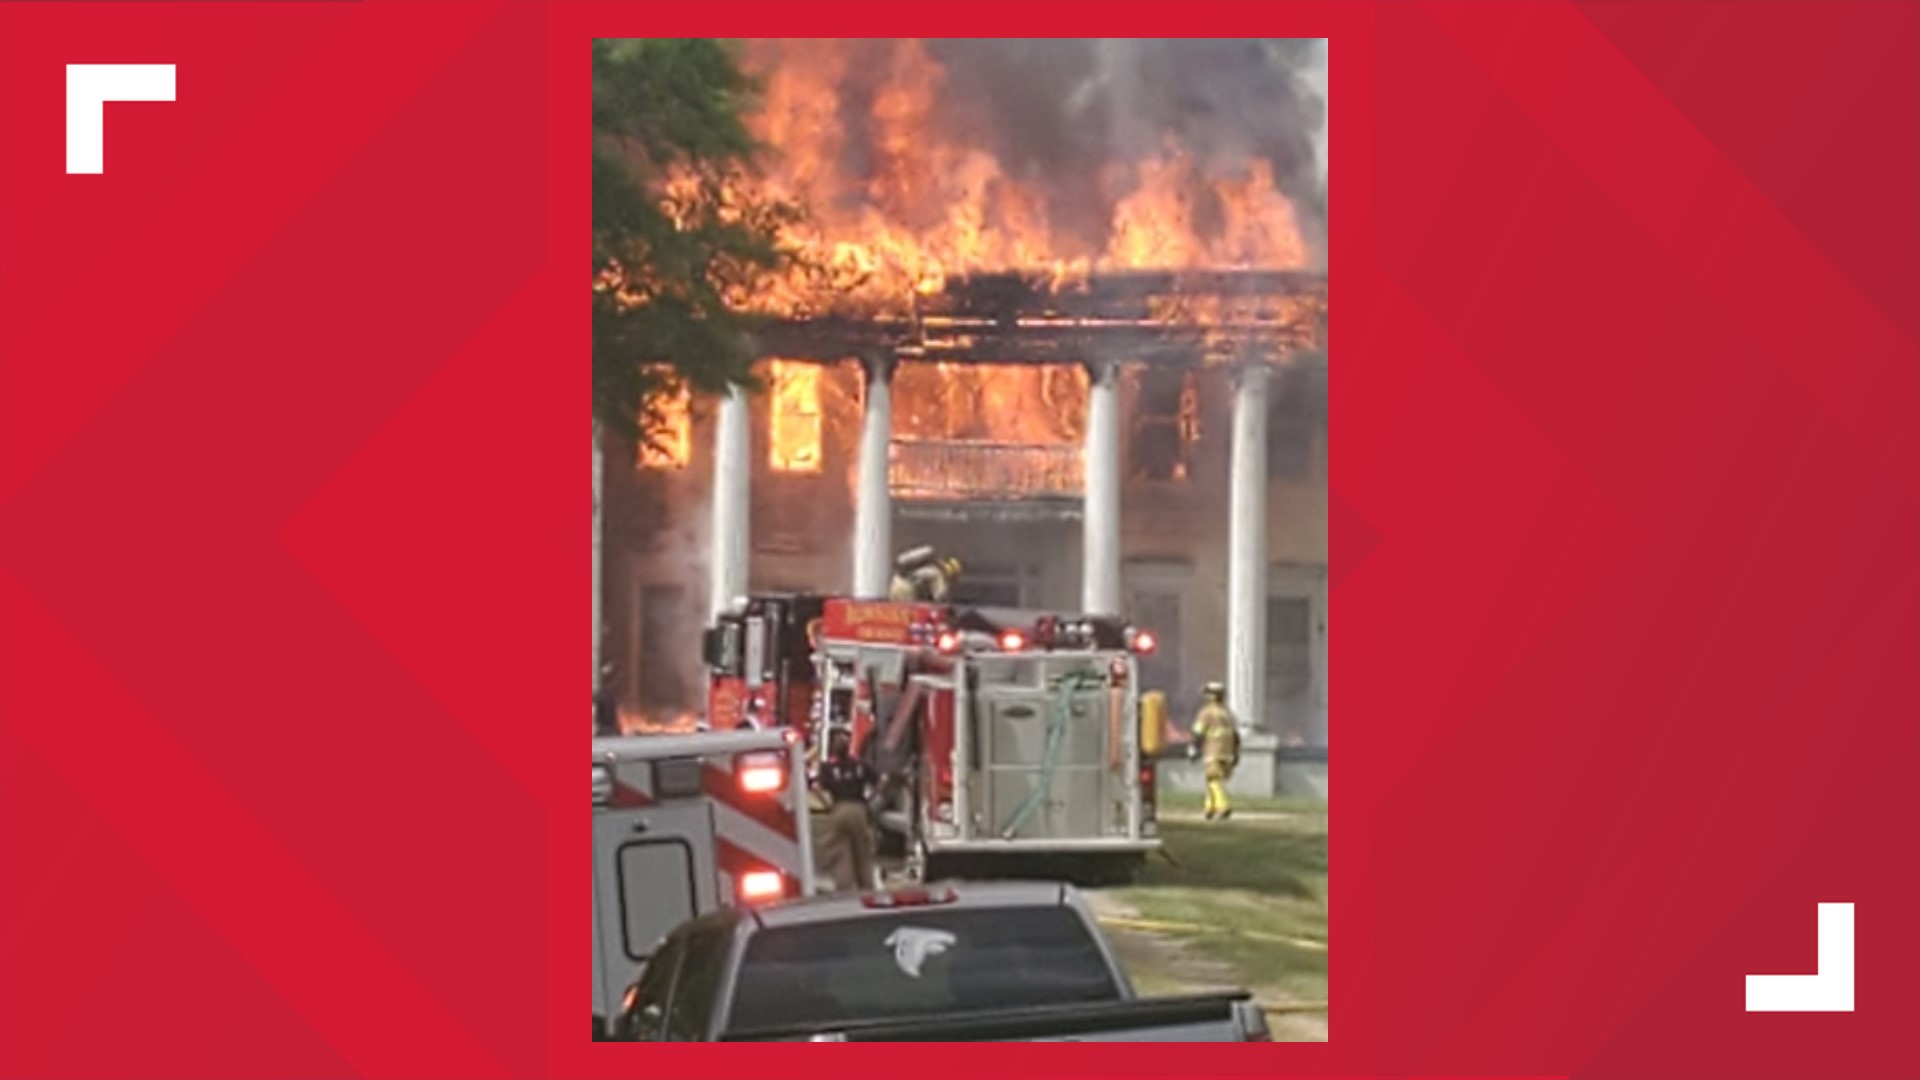 The Baldwin fire chief says one firefighter tried going inside the house to attack the fire, but the old antebellum home is at a complete loss.